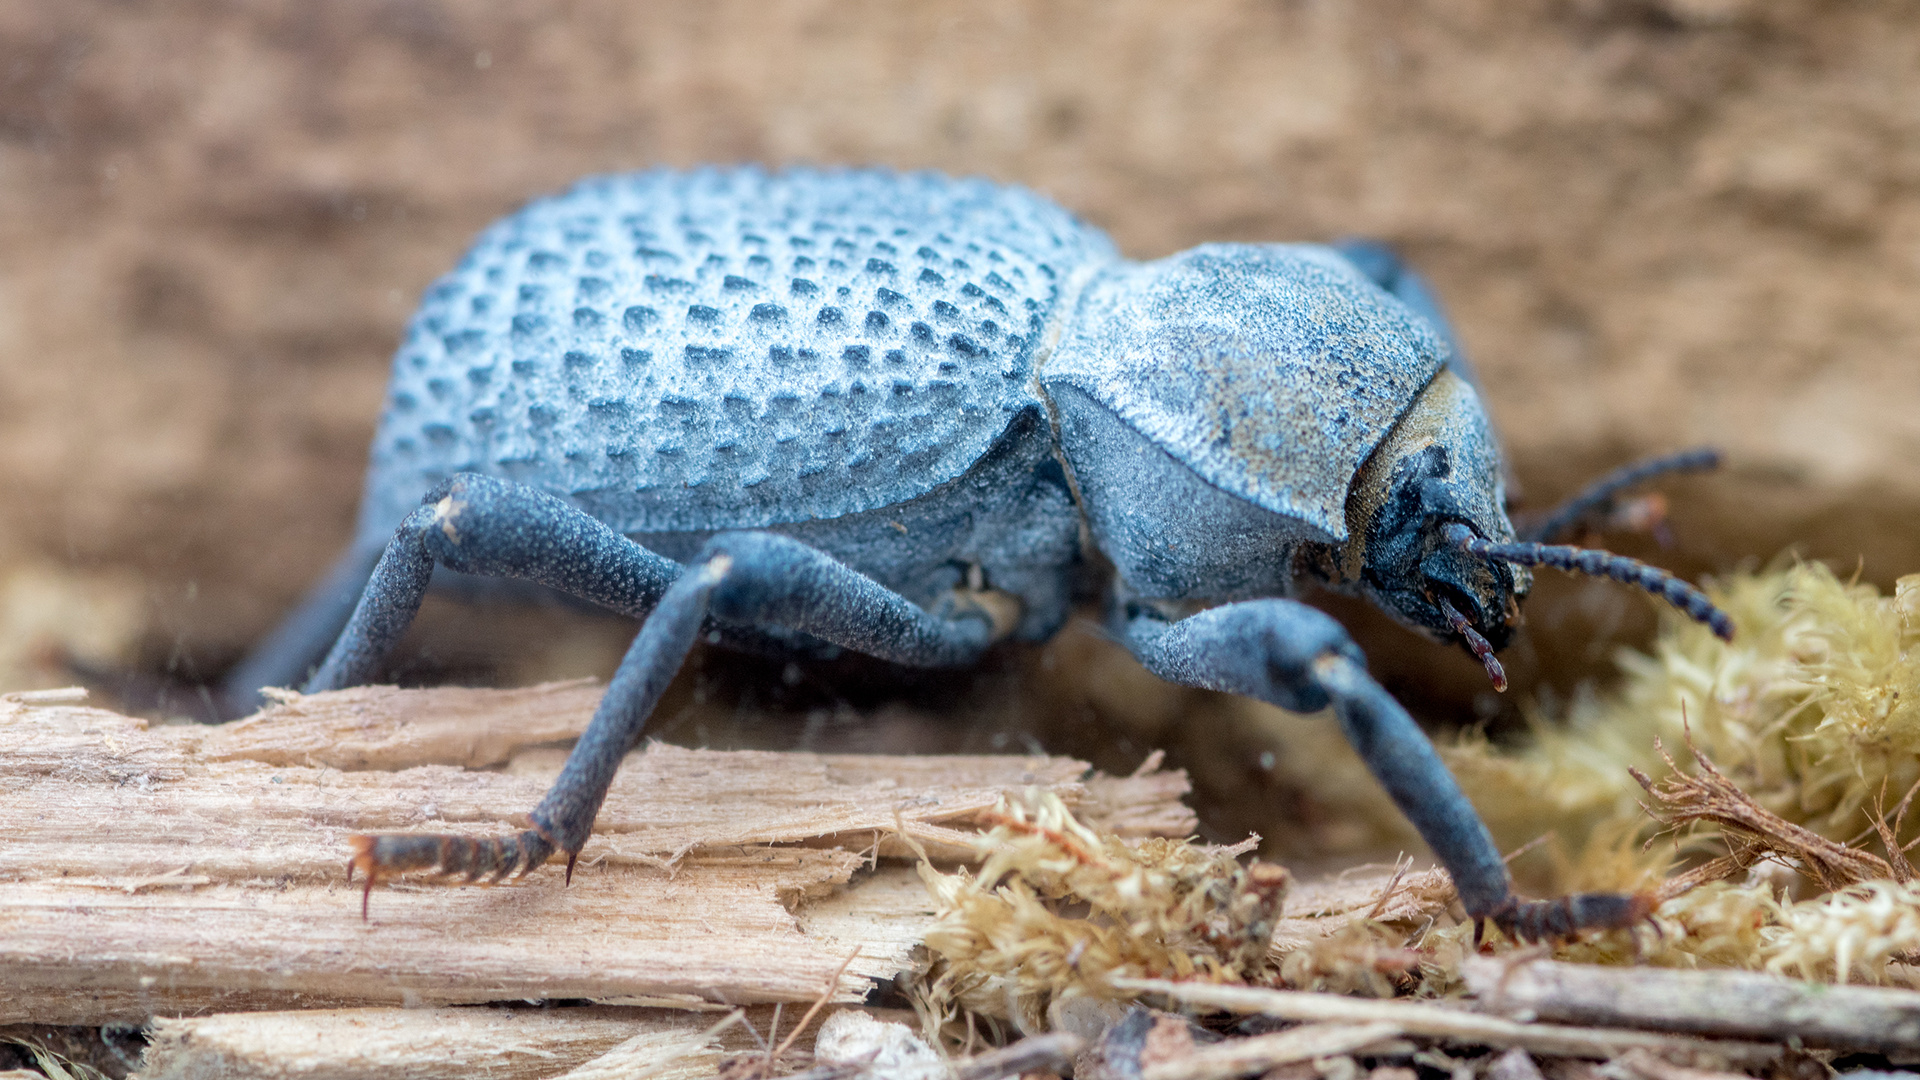 Desert ironclad beetles are known for their remarkable blue coloring.